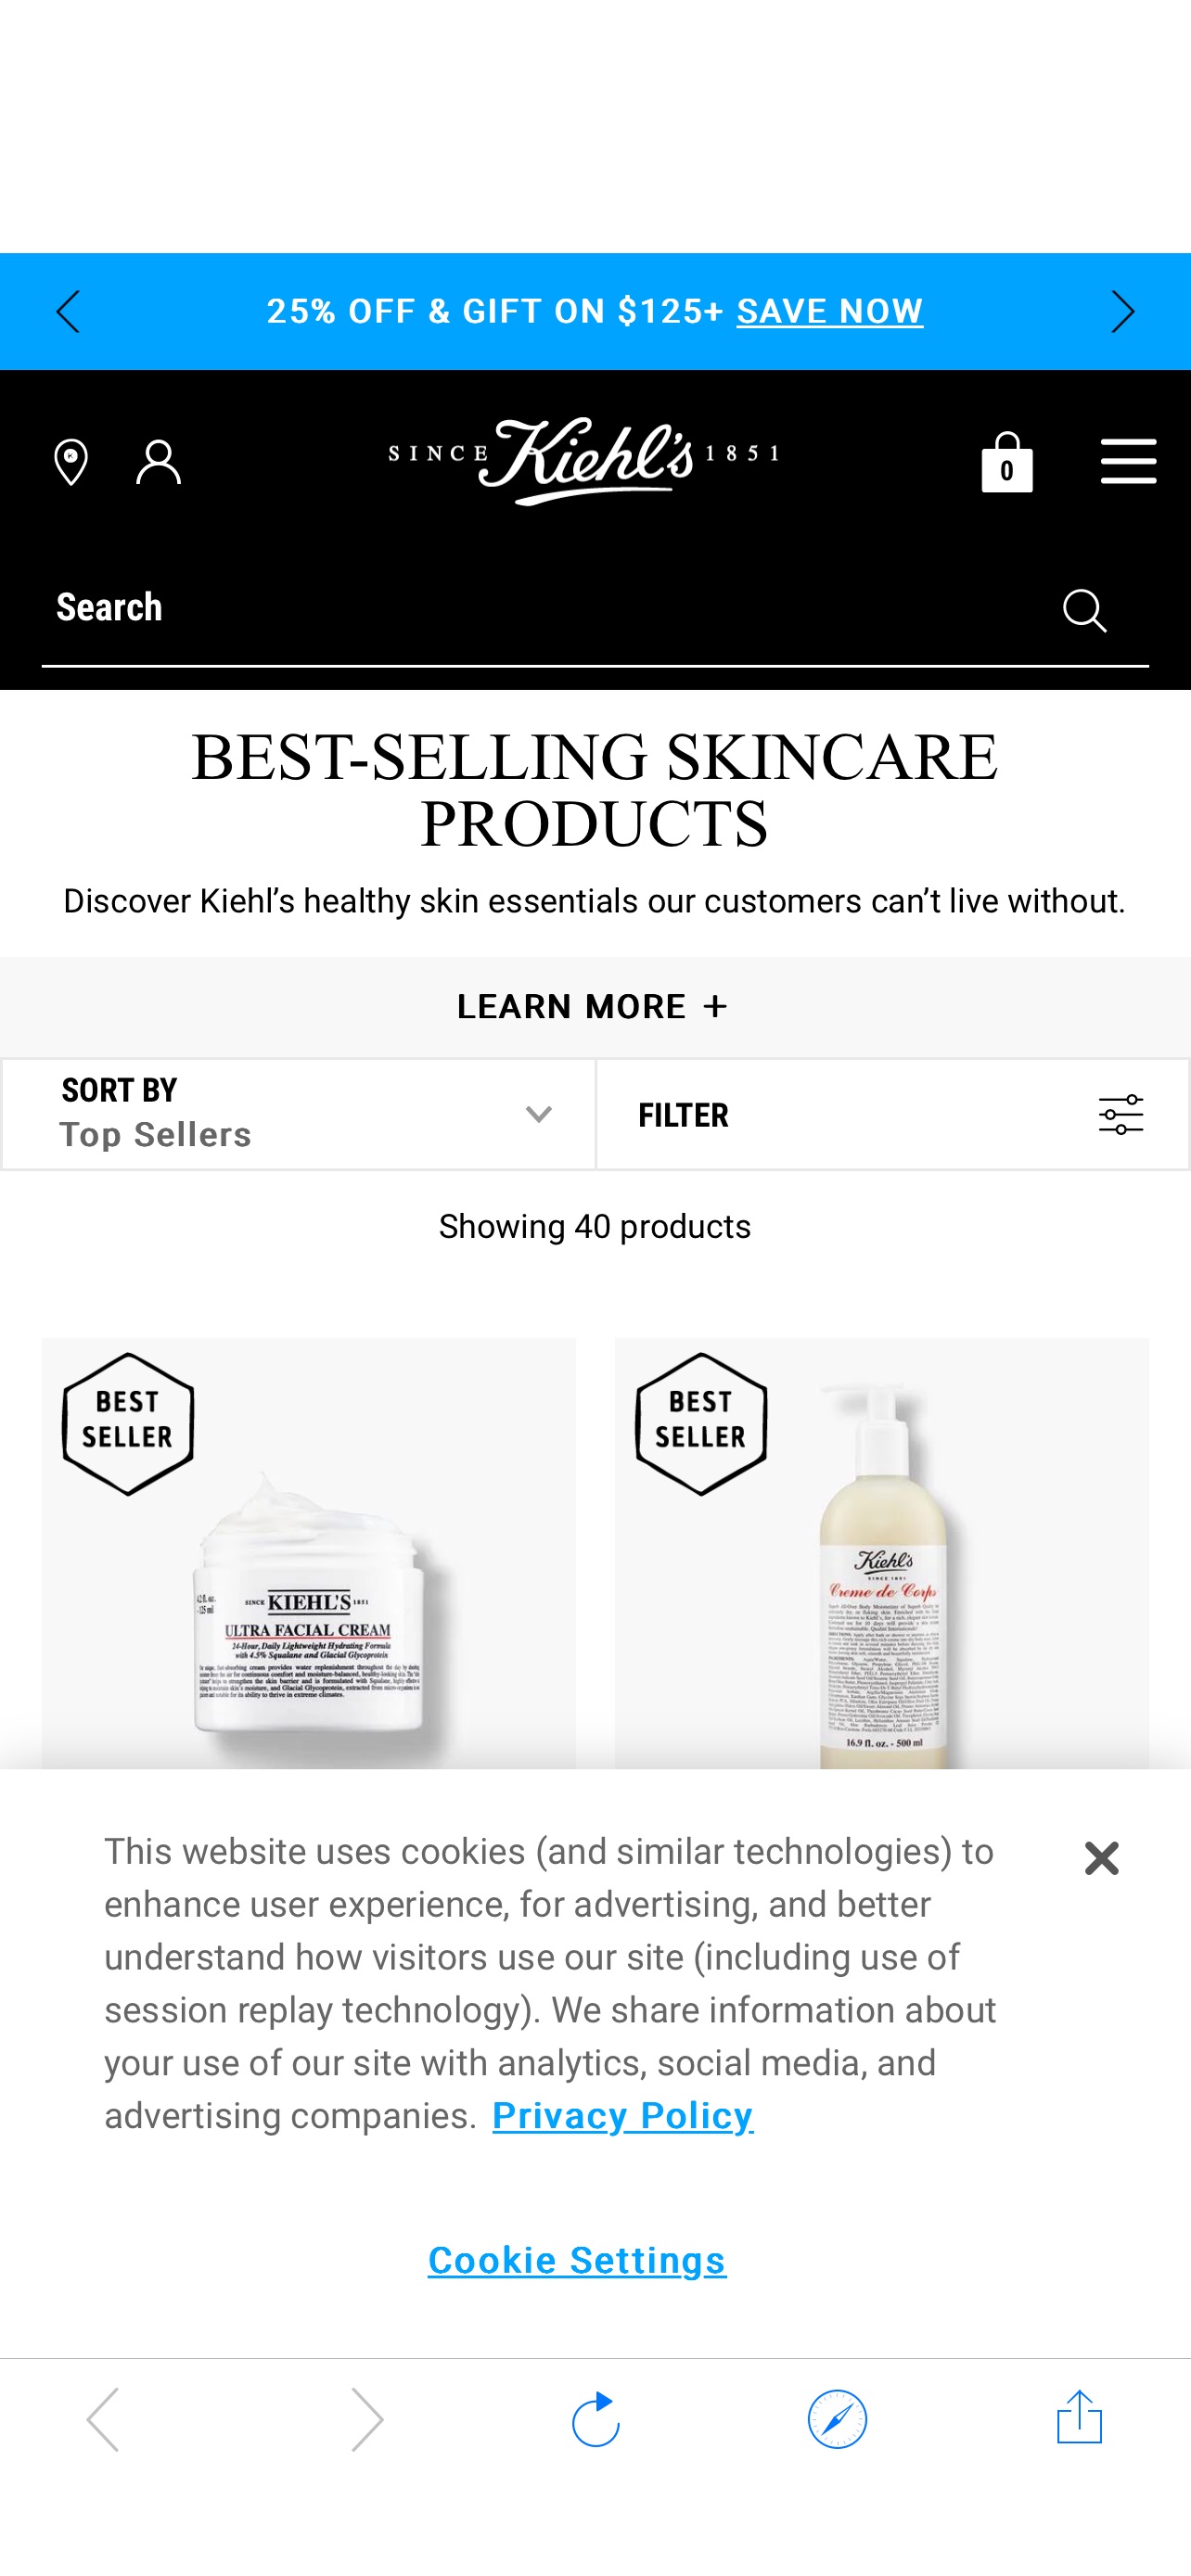 Our Best-Selling Skincare & Skin Care Products - Kiehl's